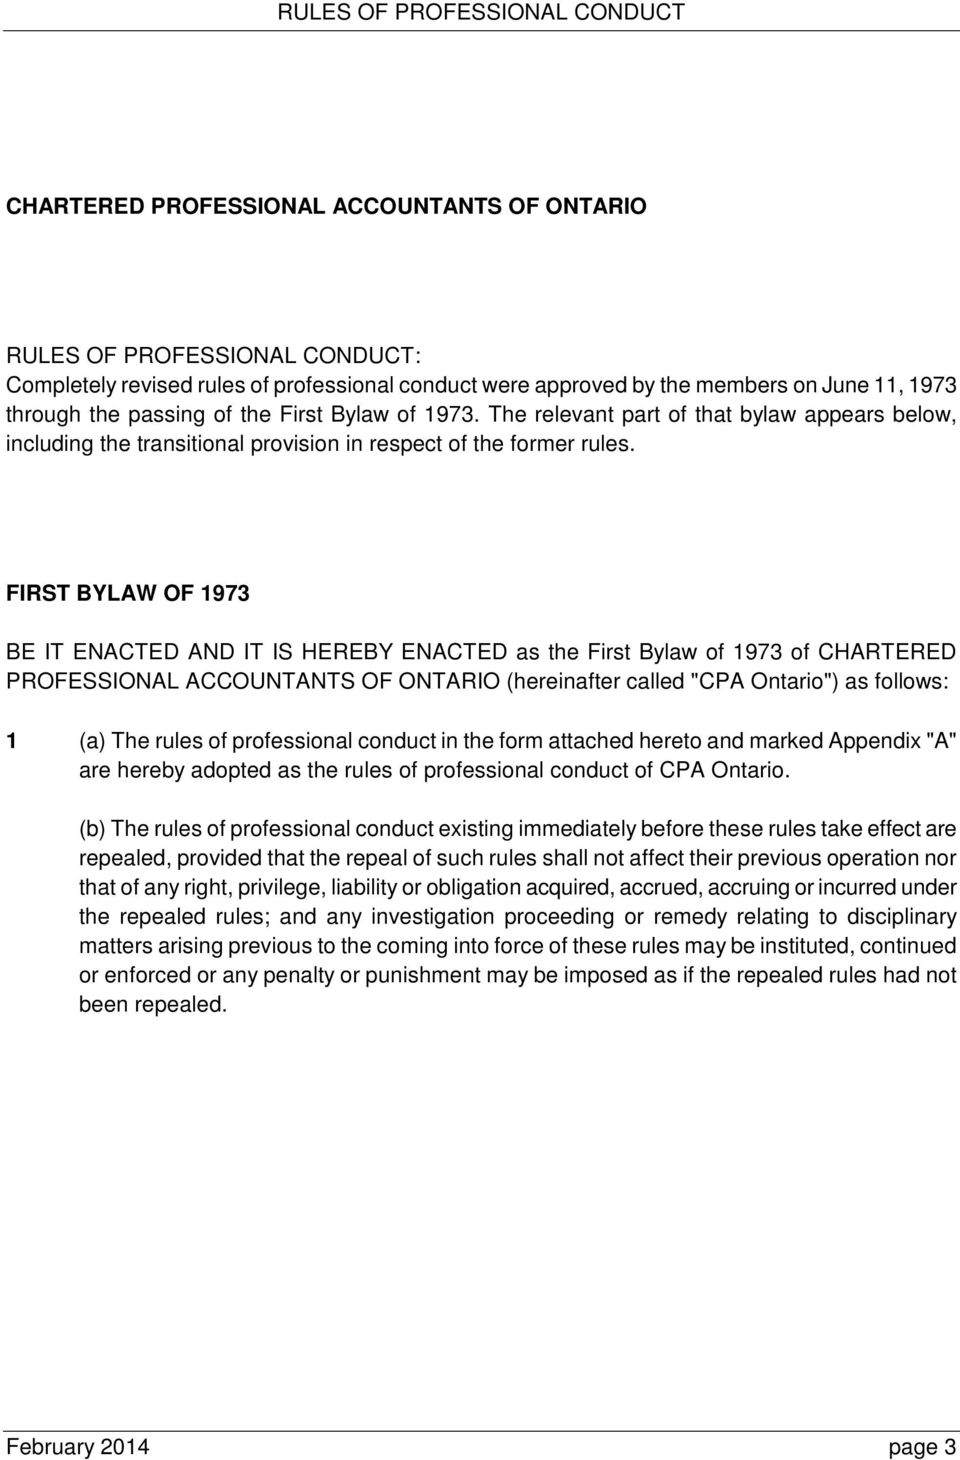 FIRST BYLAW OF 1973 BE IT ENACTED AND IT IS HEREBY ENACTED as the First Bylaw of 1973 of CHARTERED PROFESSIONAL ACCOUNTANTS OF ONTARIO (hereinafter called "CPA Ontario") as follows: 1 (a) The rules